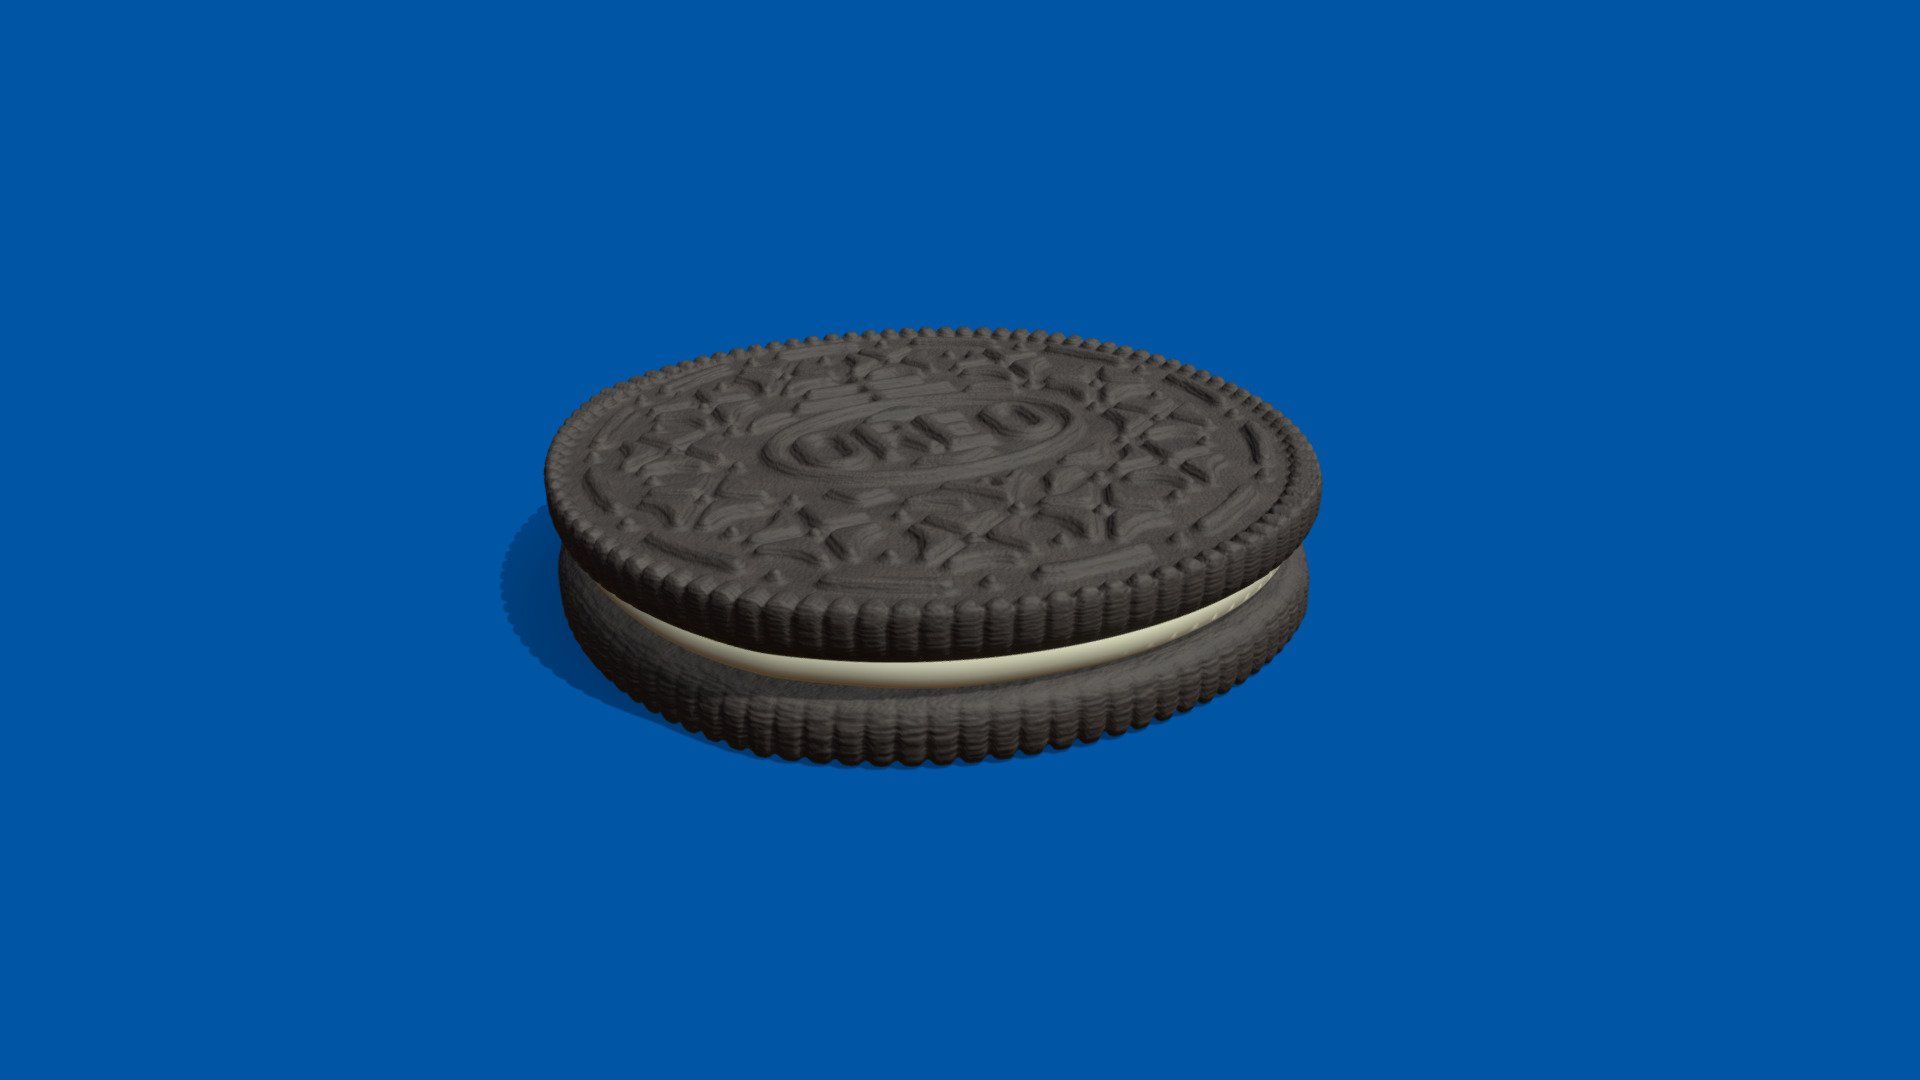 A 3d rendered cookie with the oreo logo on it - Oreo